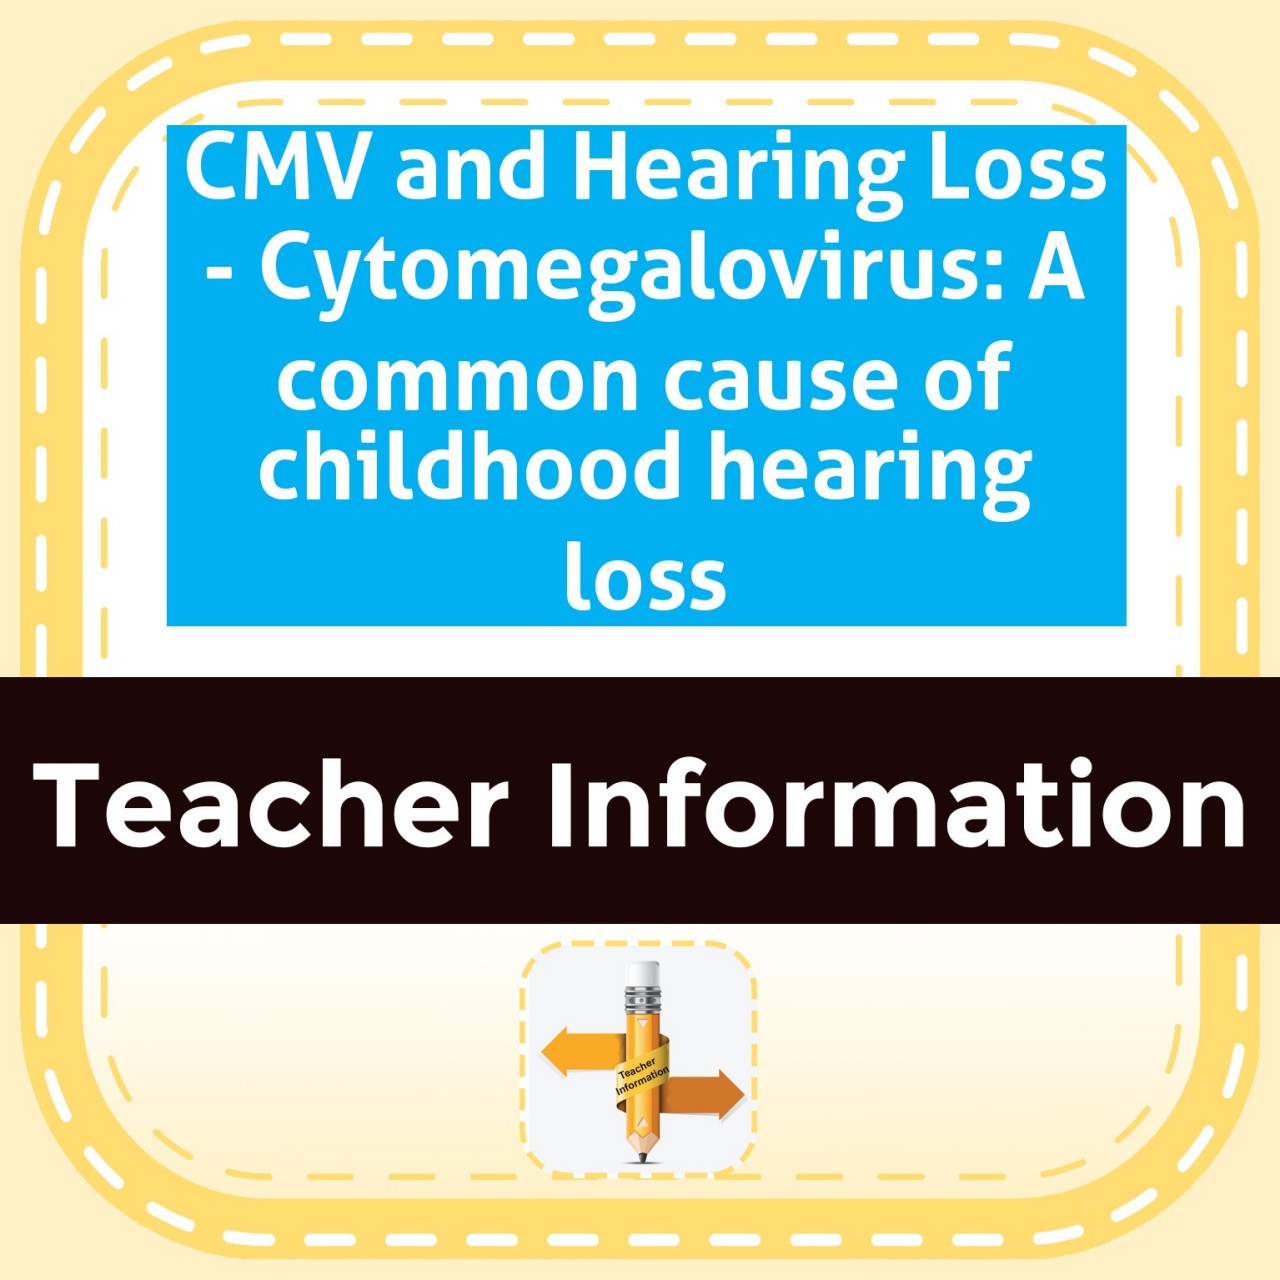 CMV and Hearing Loss - Cytomegalovirus: A common cause of childhood hearing loss